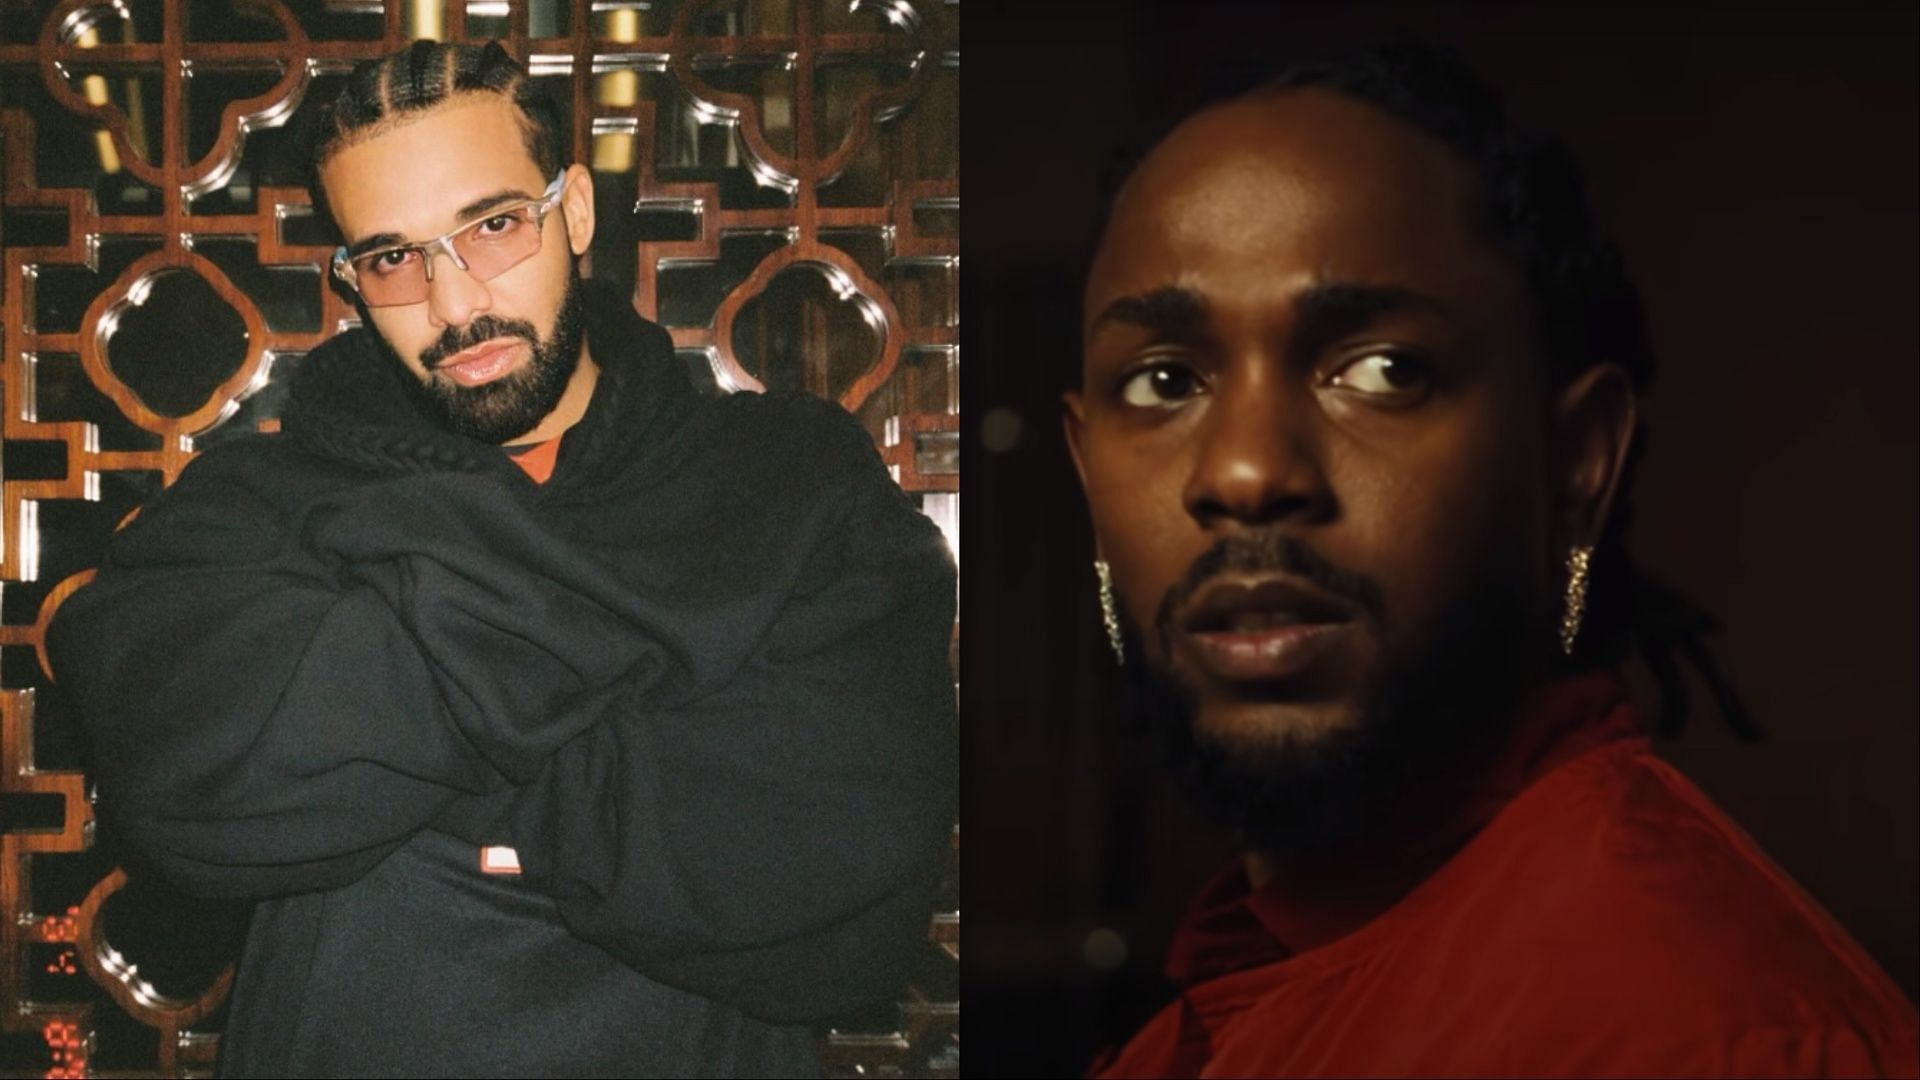 Drake deletes Kendrick Lamar-diss tracks related content from Instagram (Image via champagnepapi/Instagram and Kendrick Lamar/YouTube)